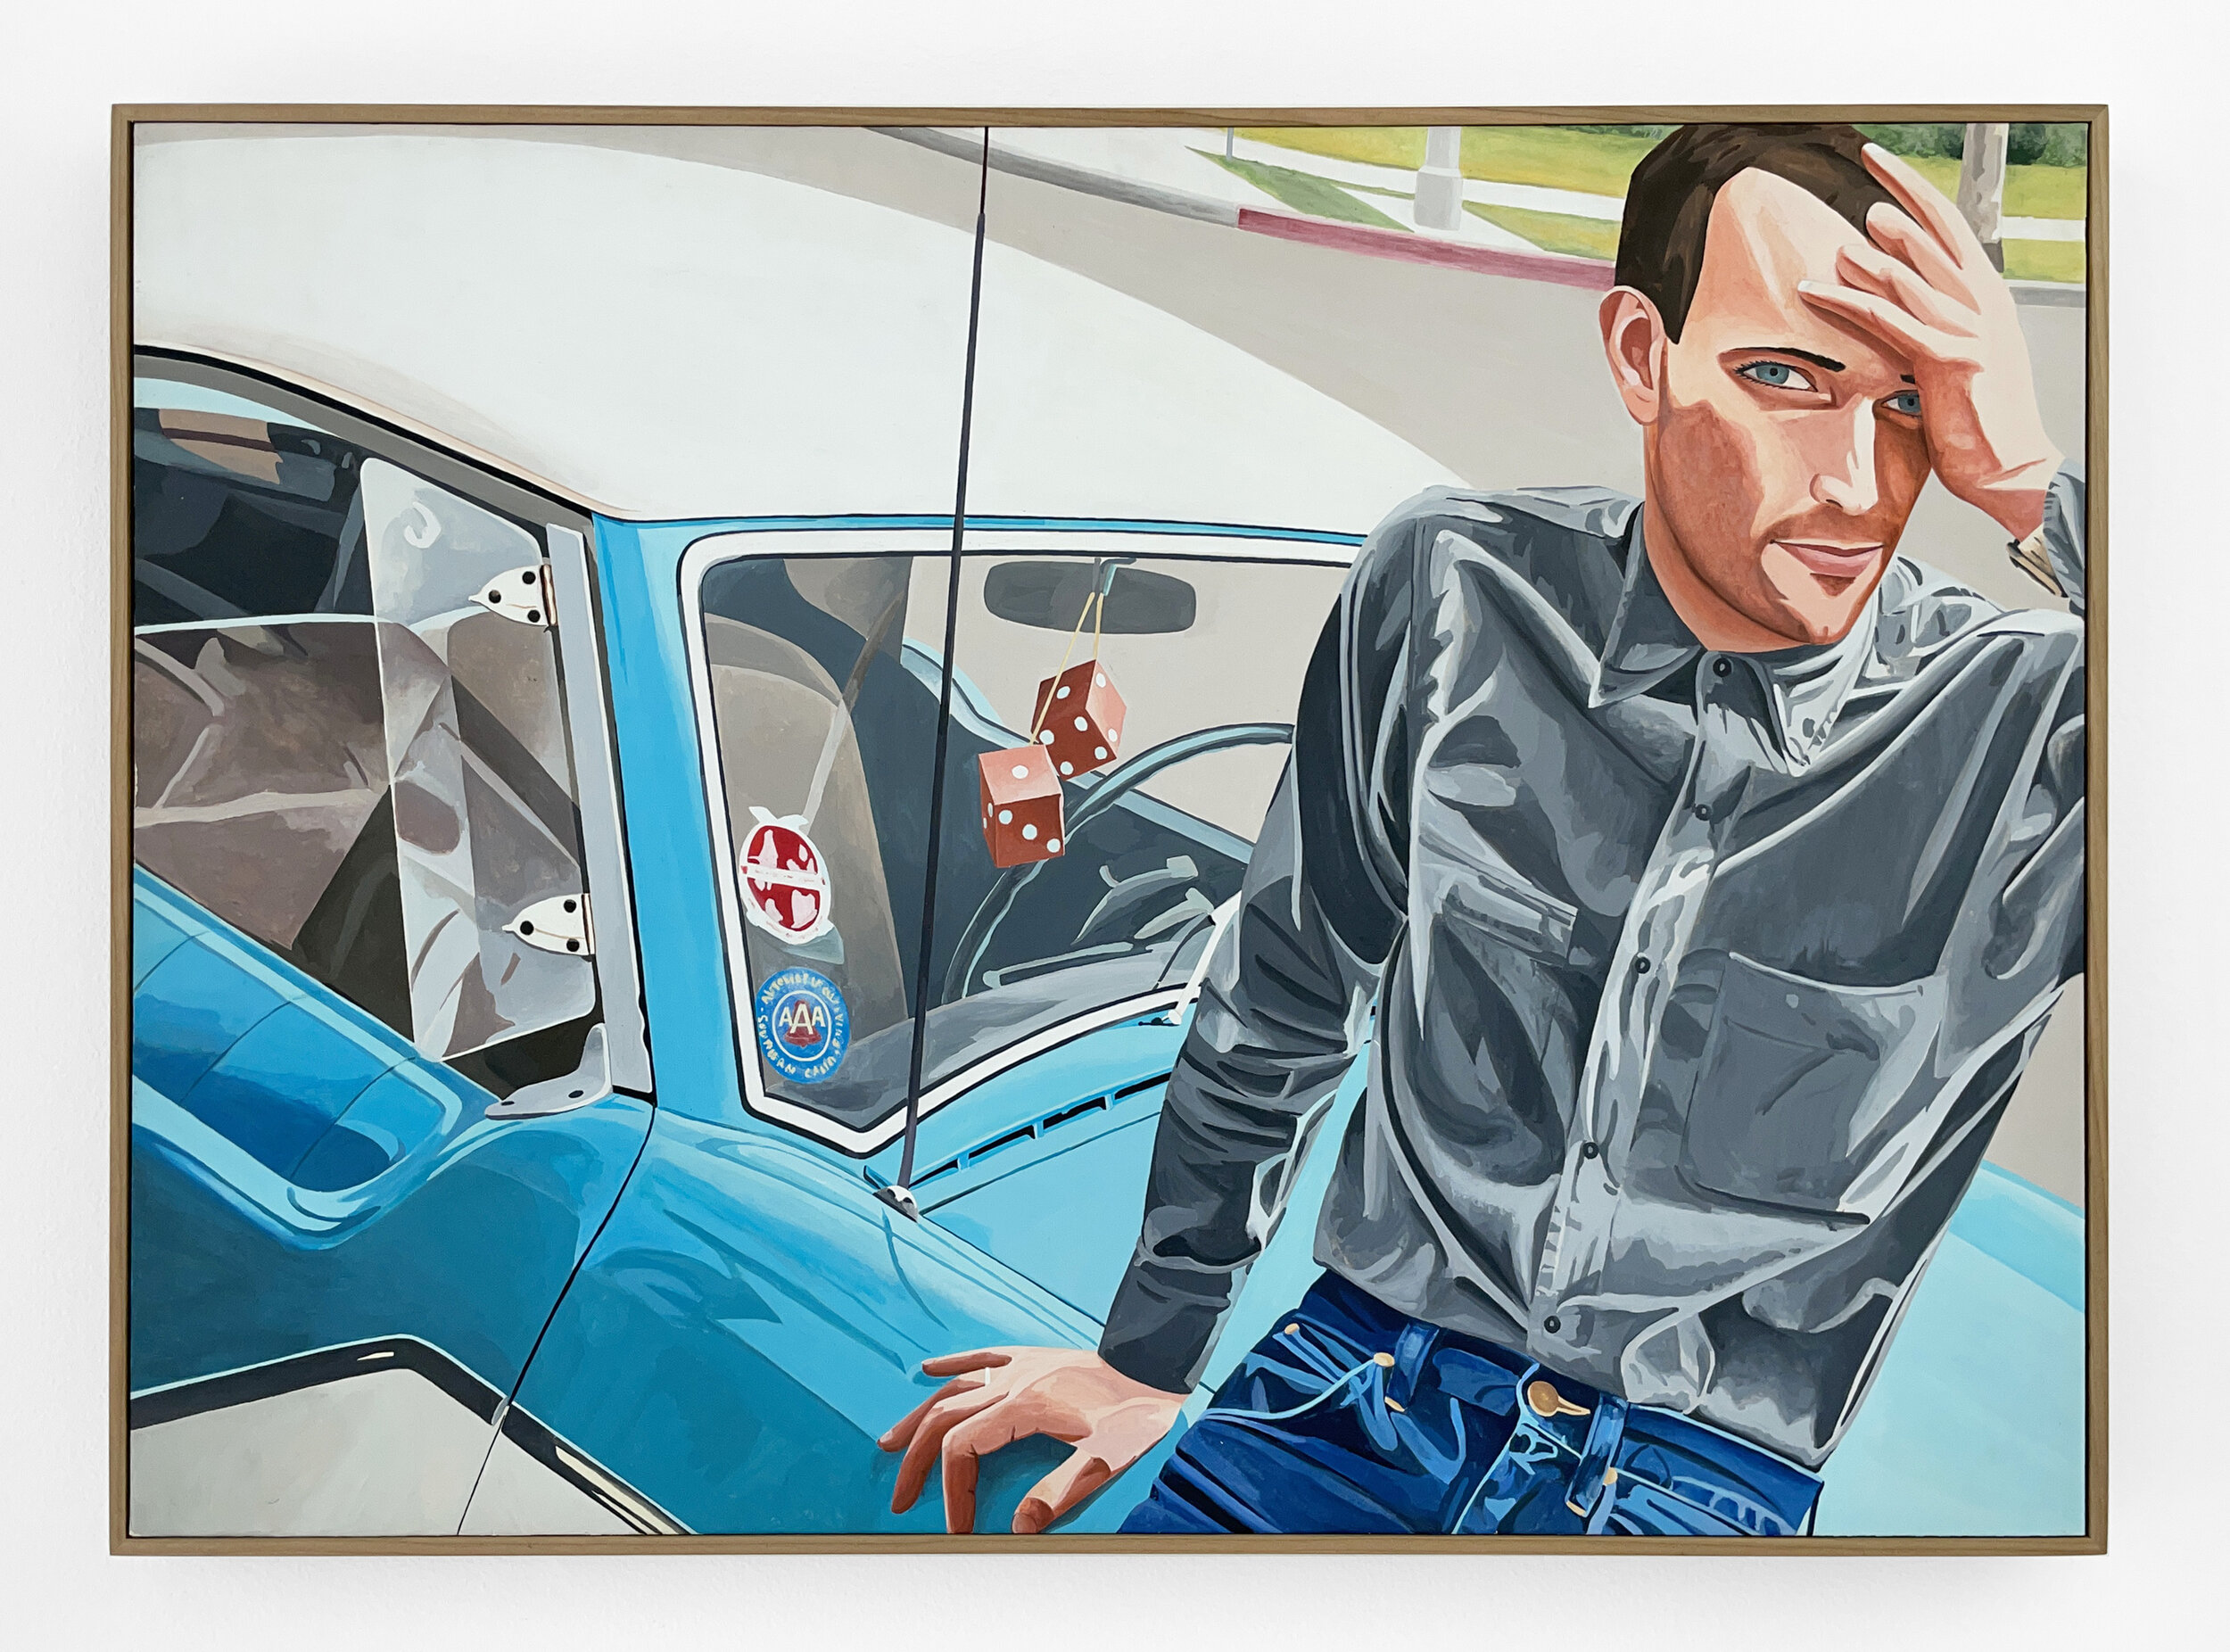  “Jules”, 1980, Acrylic on board, mounted on panel, 20.5 x 28.5 inches   Jules Bates with one of the Nash Metropolitans that he had carefully restored. Jules made iconic photographs of bands such as Devo, The Go Gos and The Weirdos. He often photogra